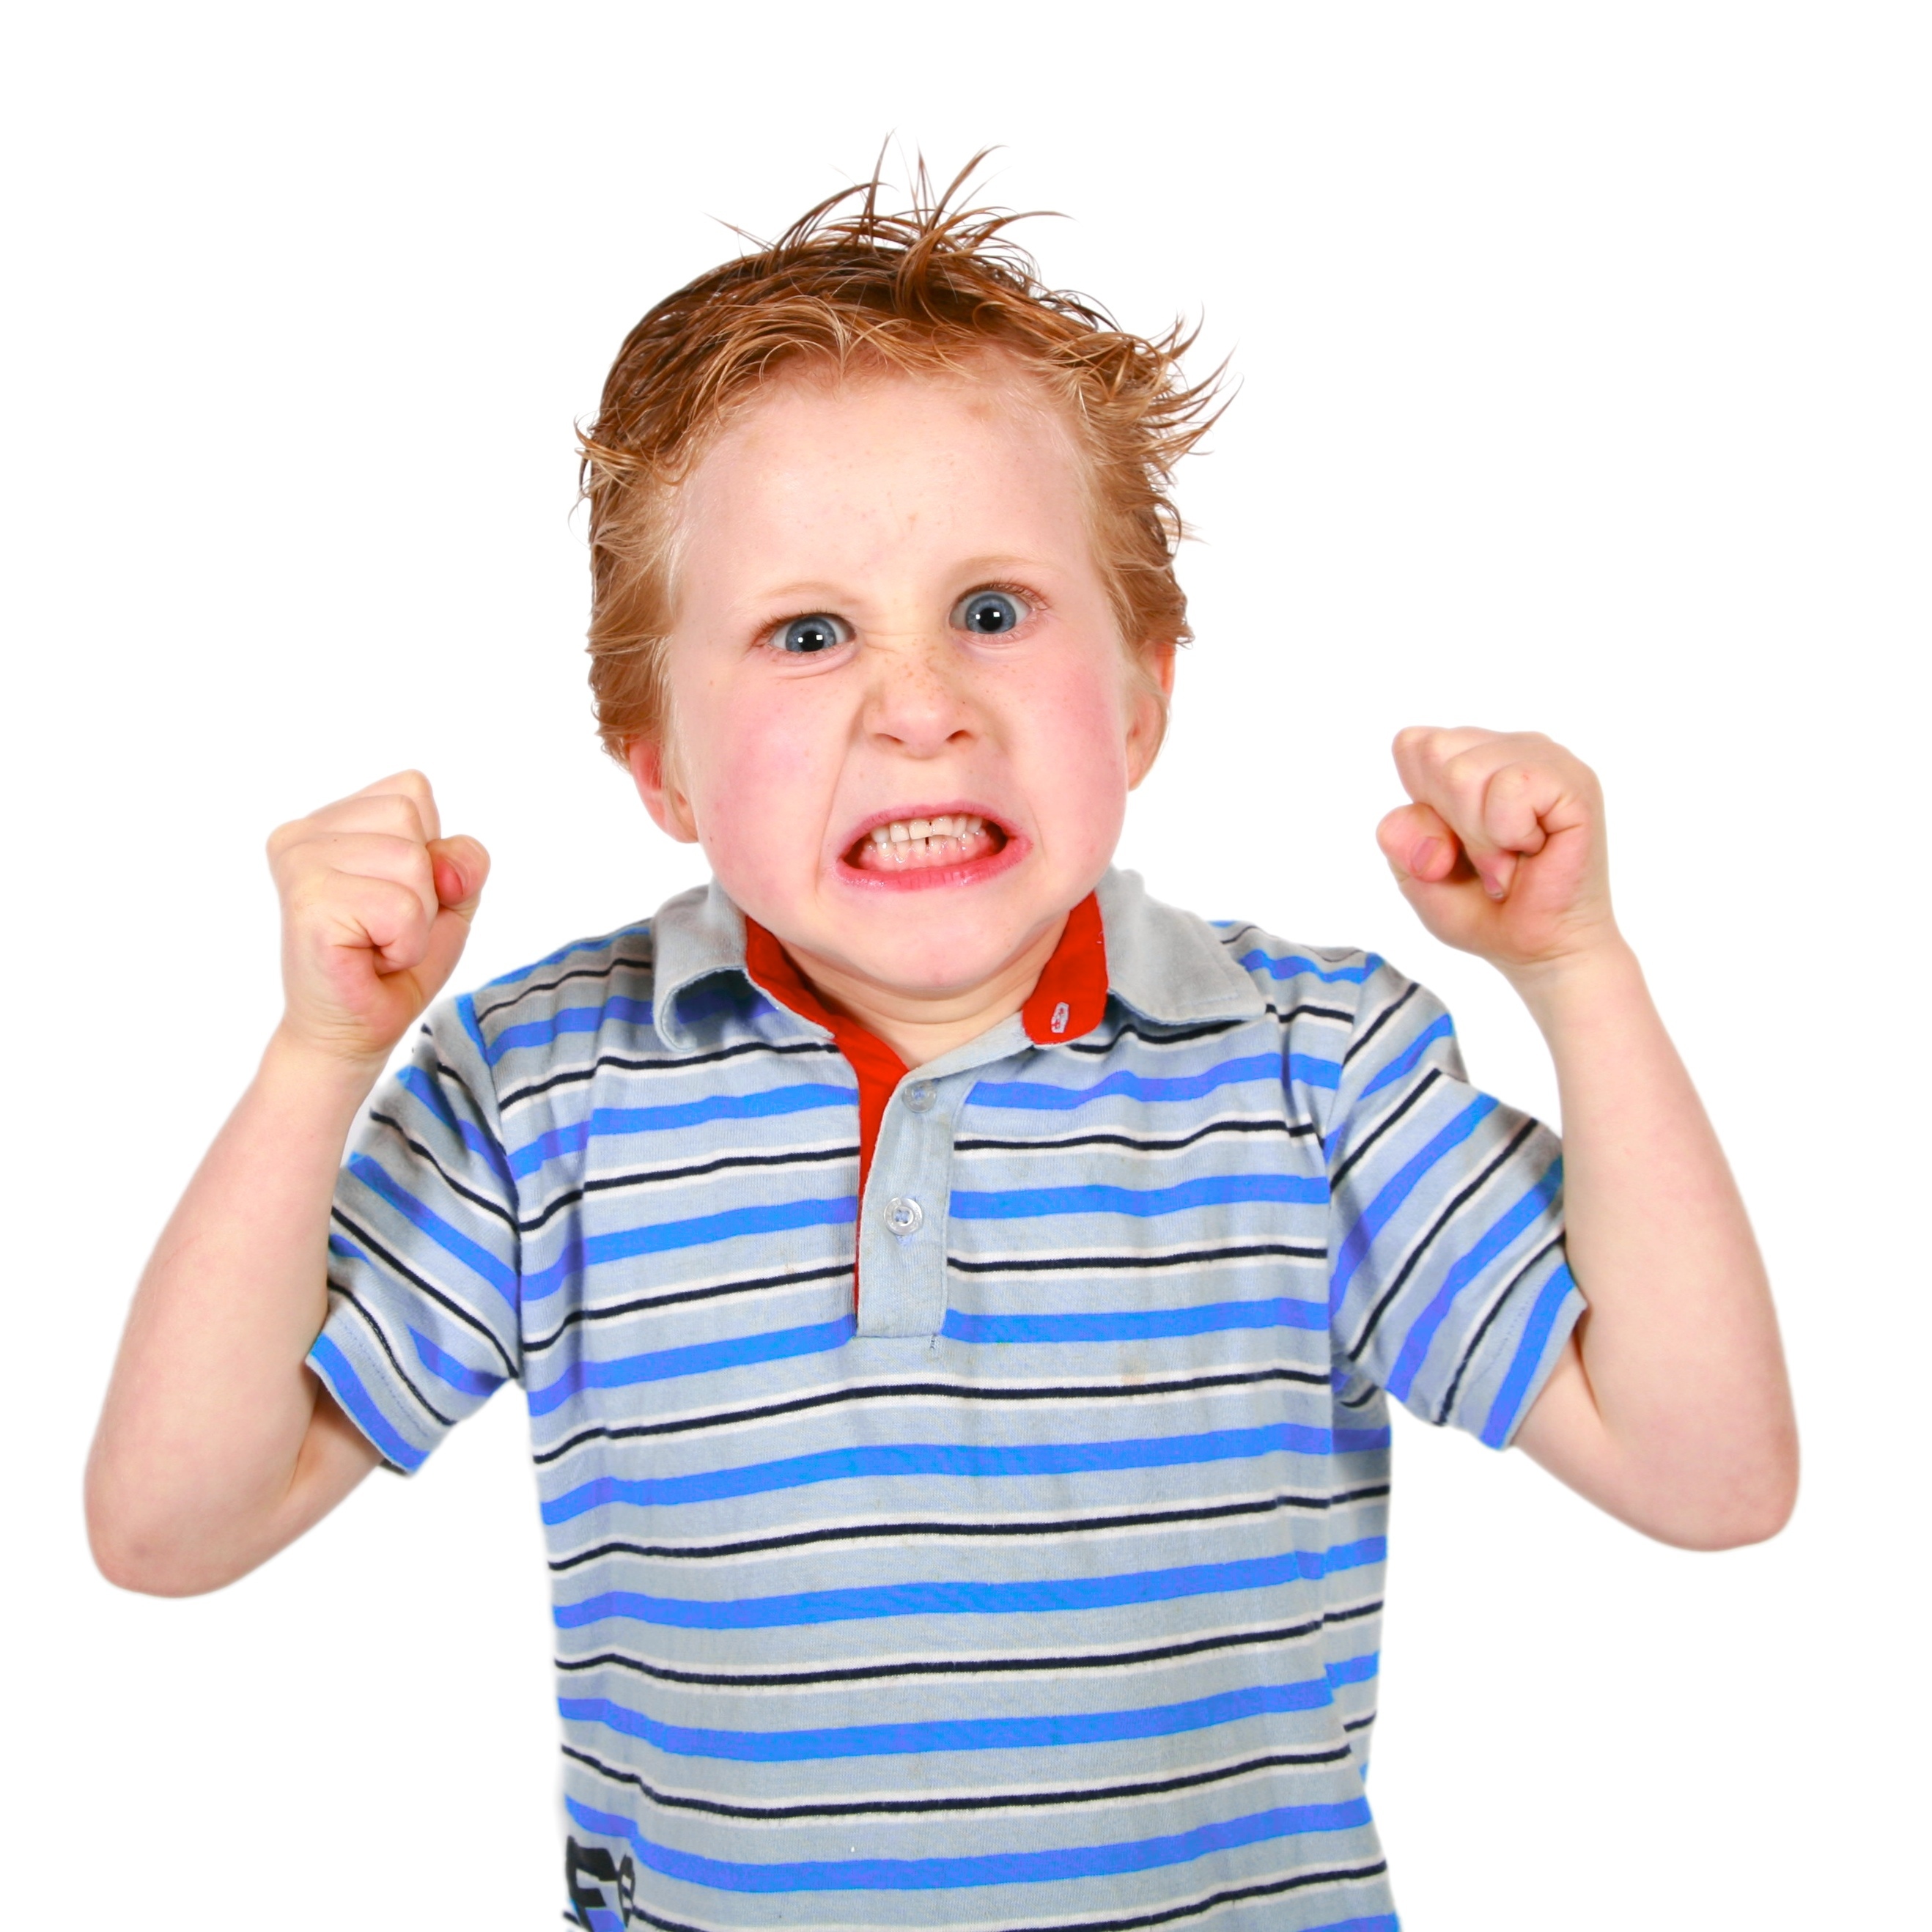 Angry, aggressive children and how to change them